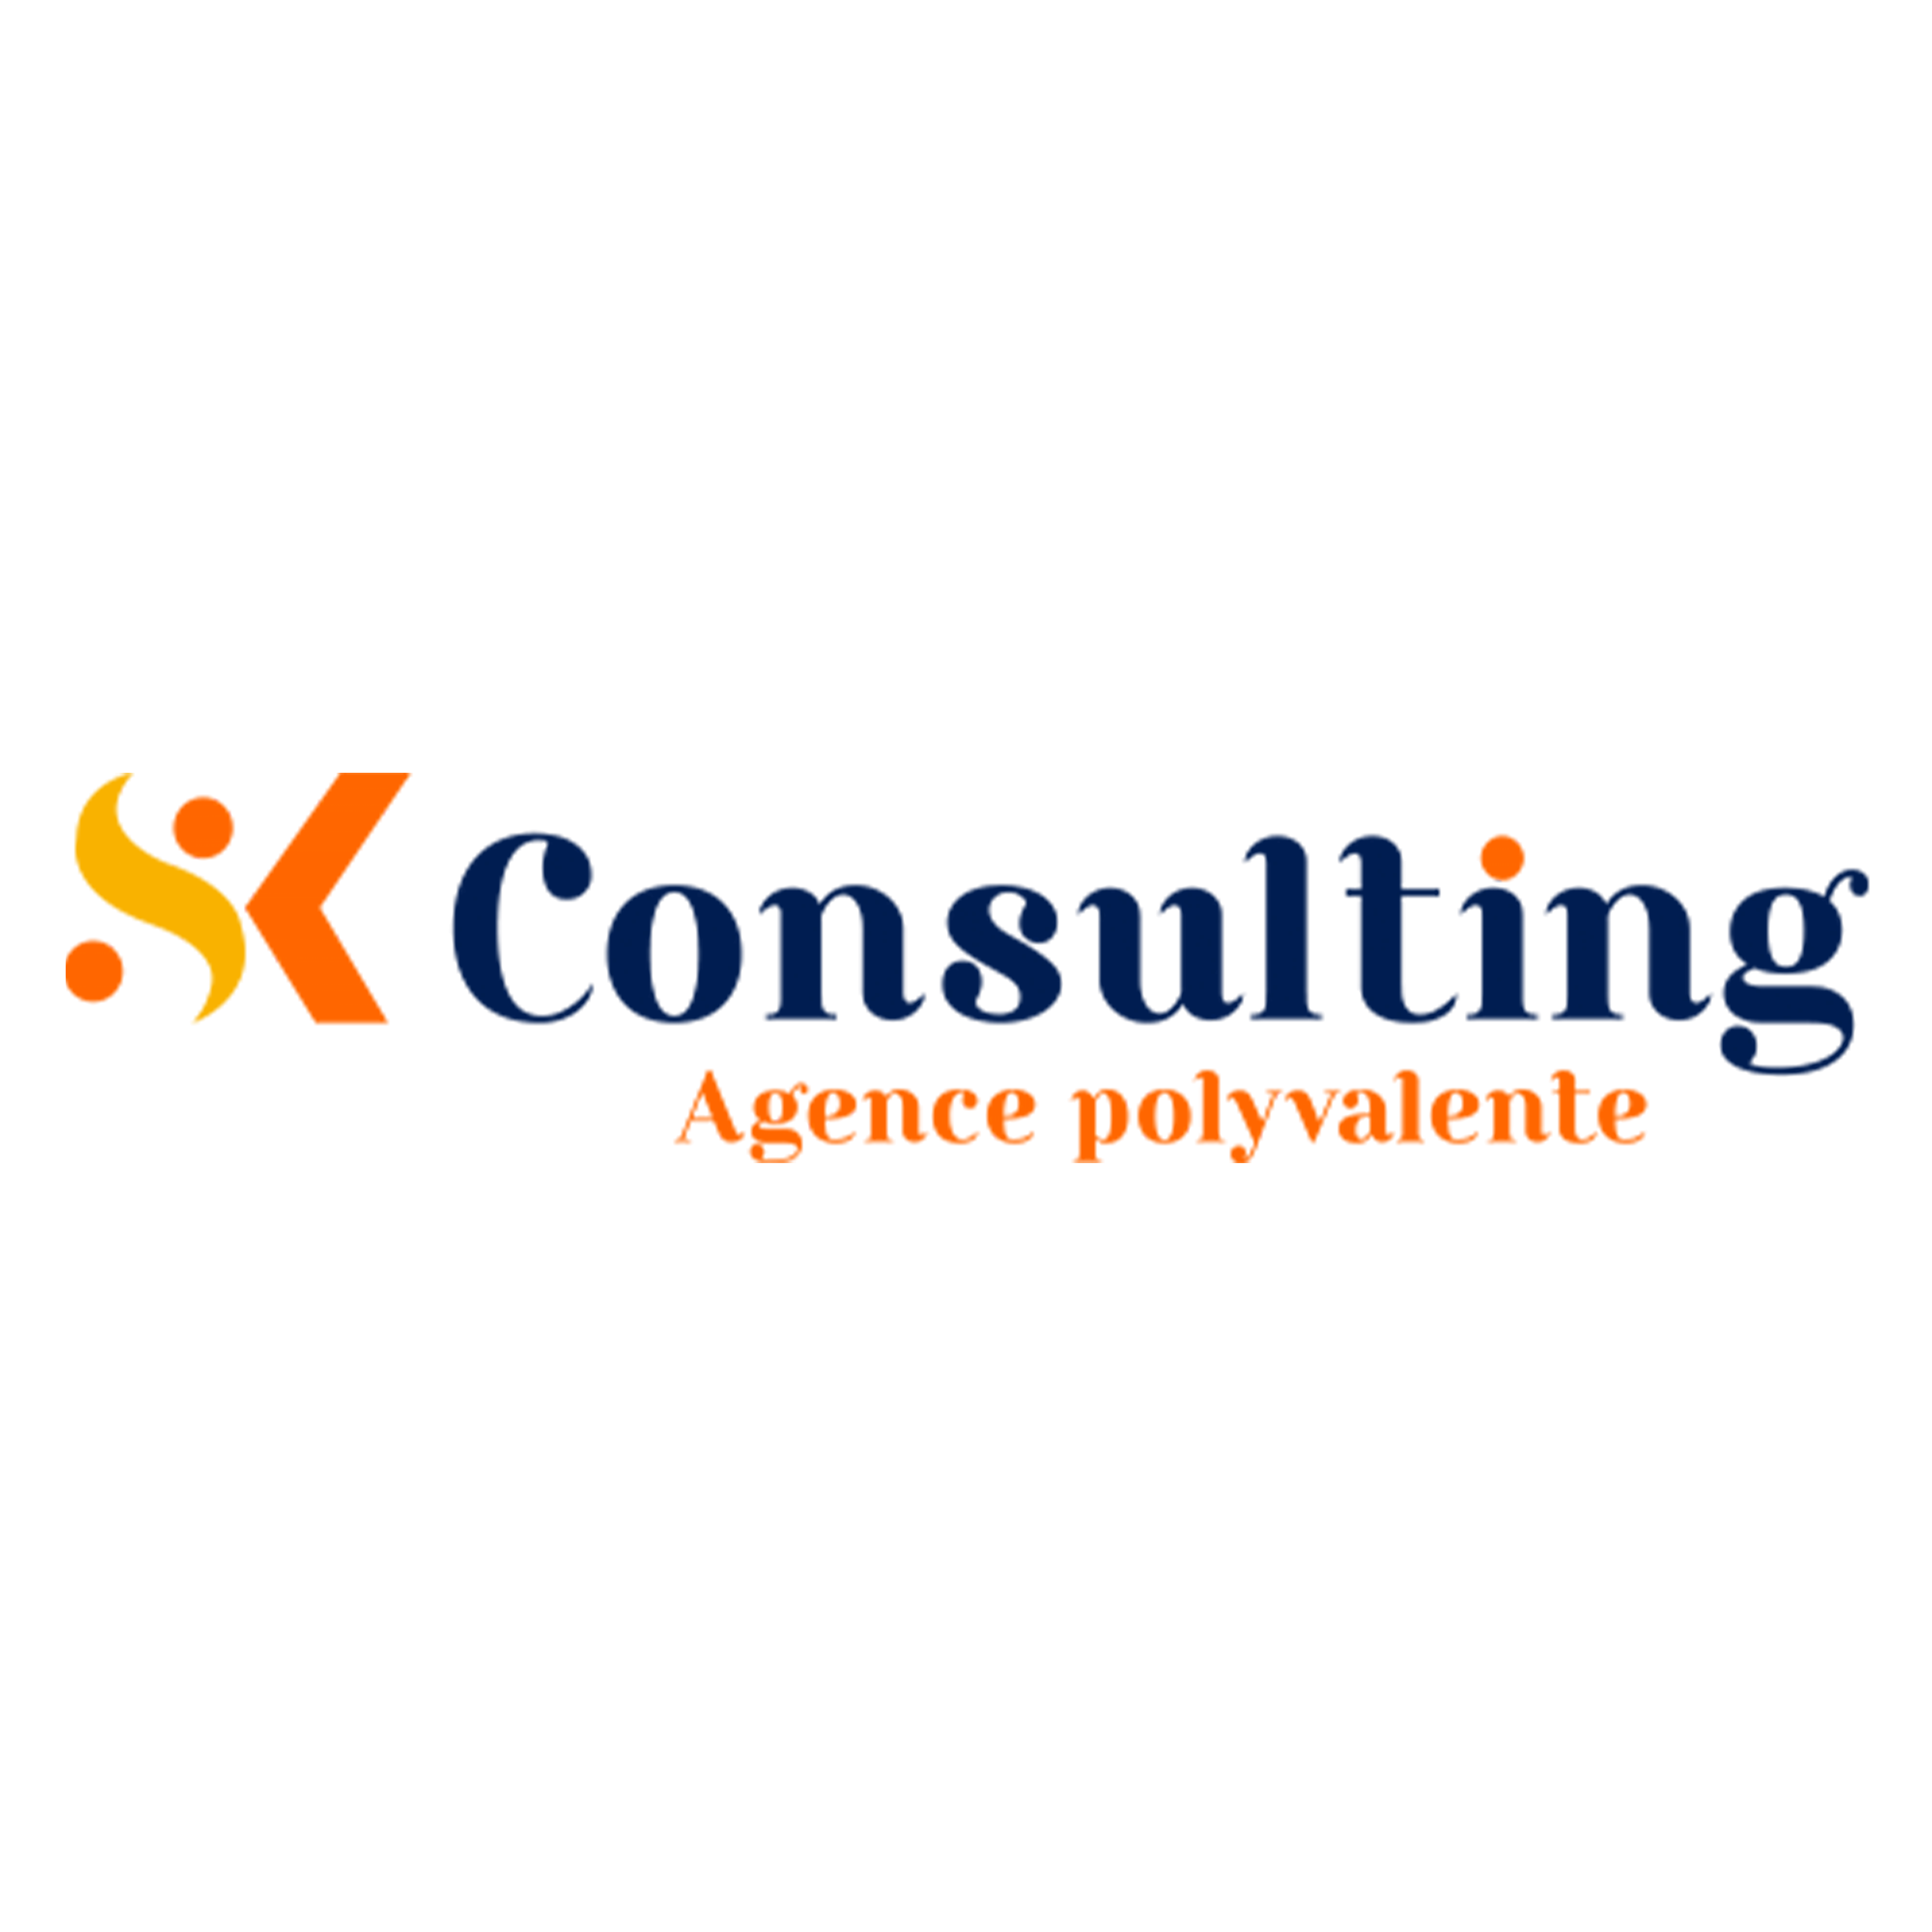 SK Consulting